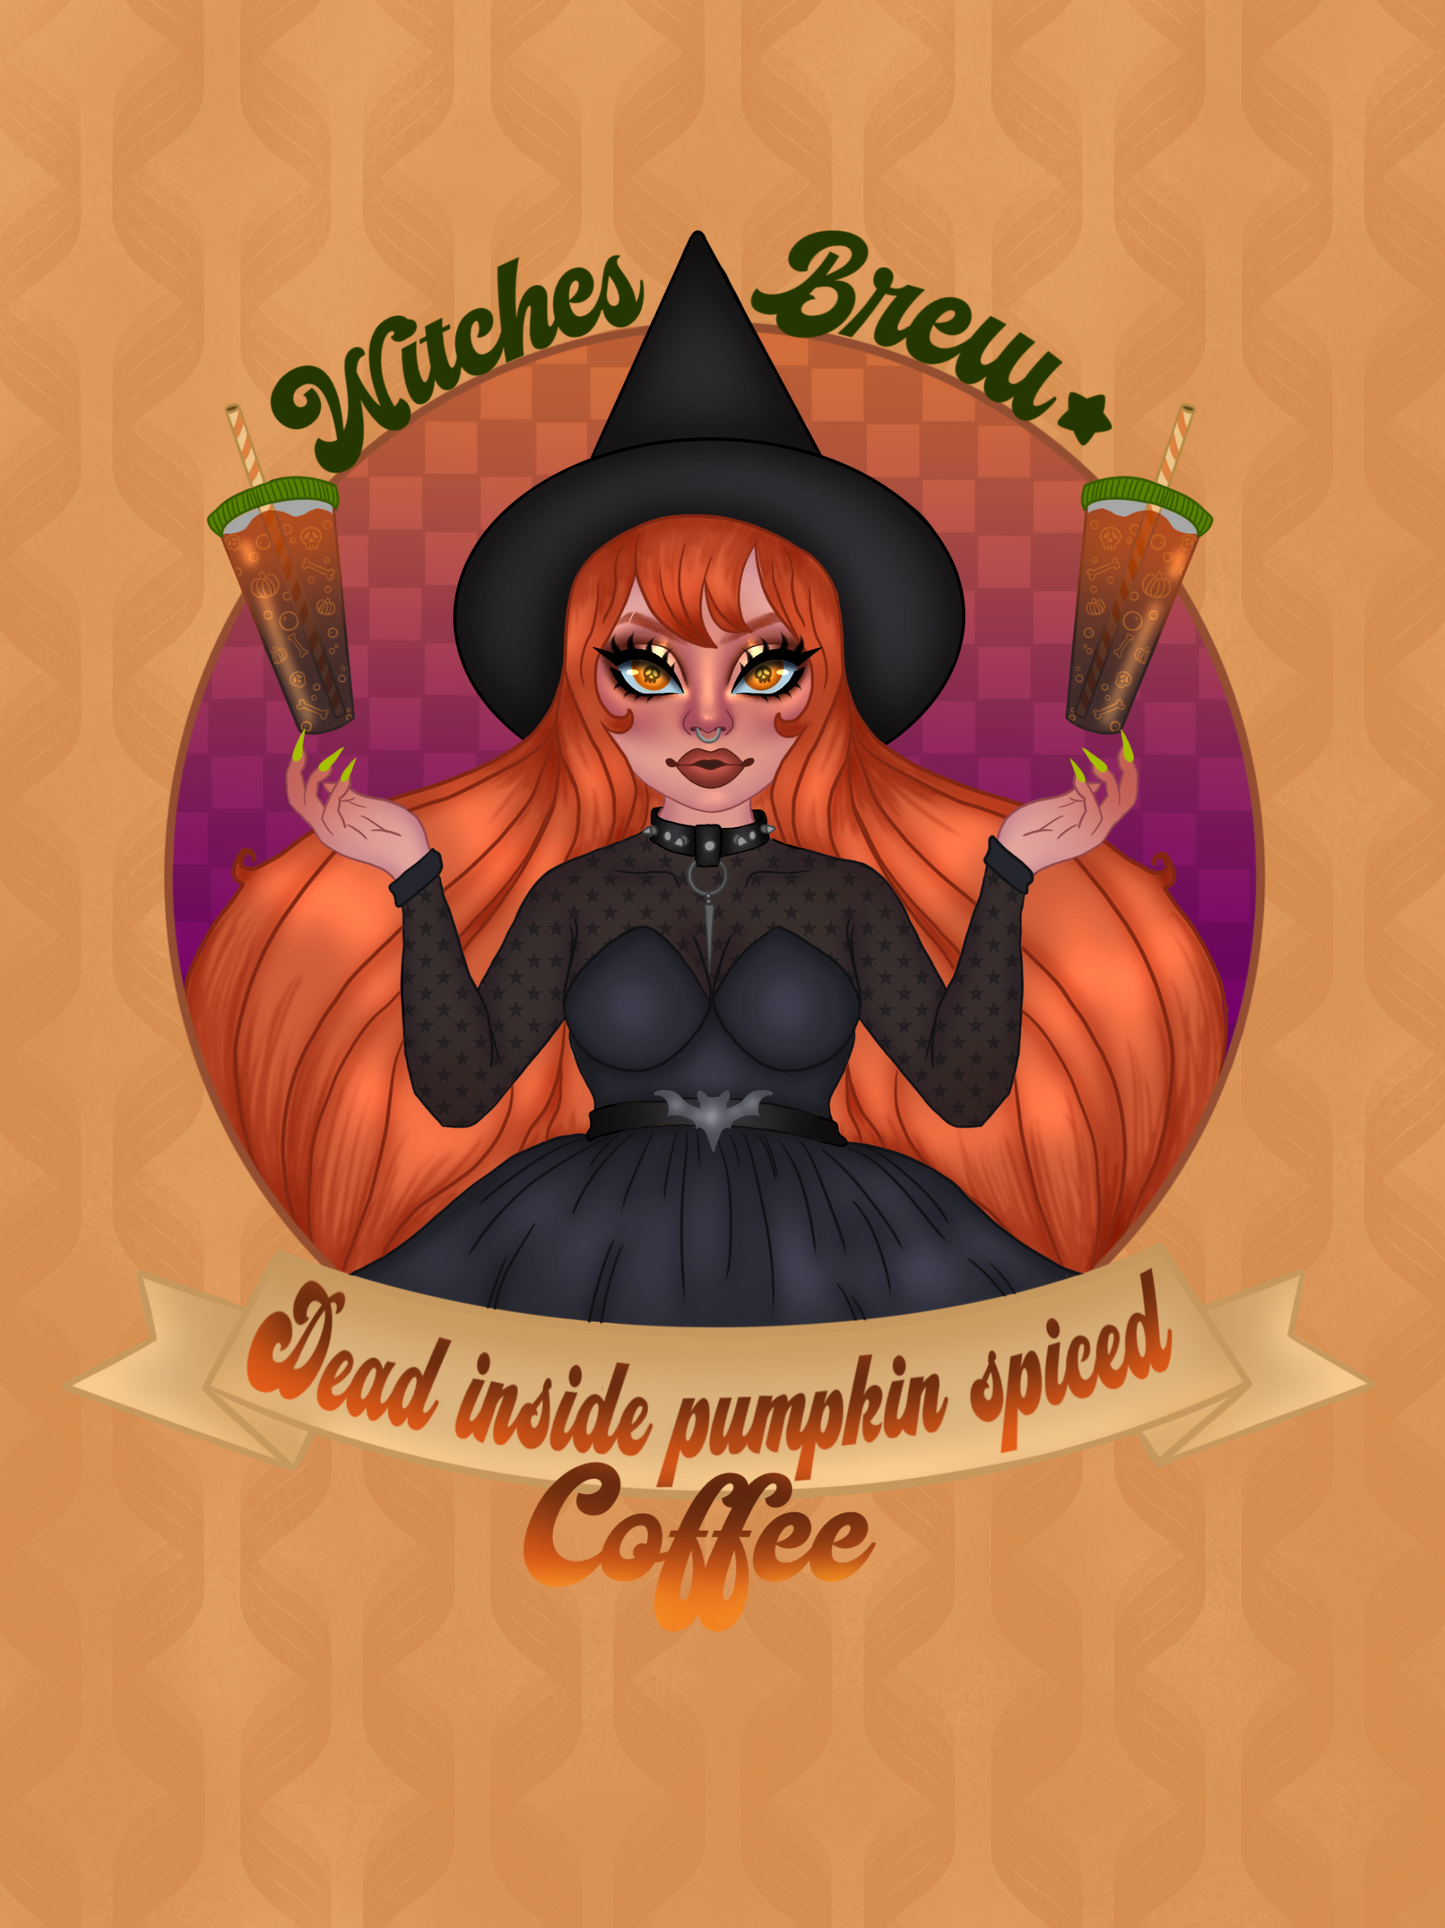 Witches brew print